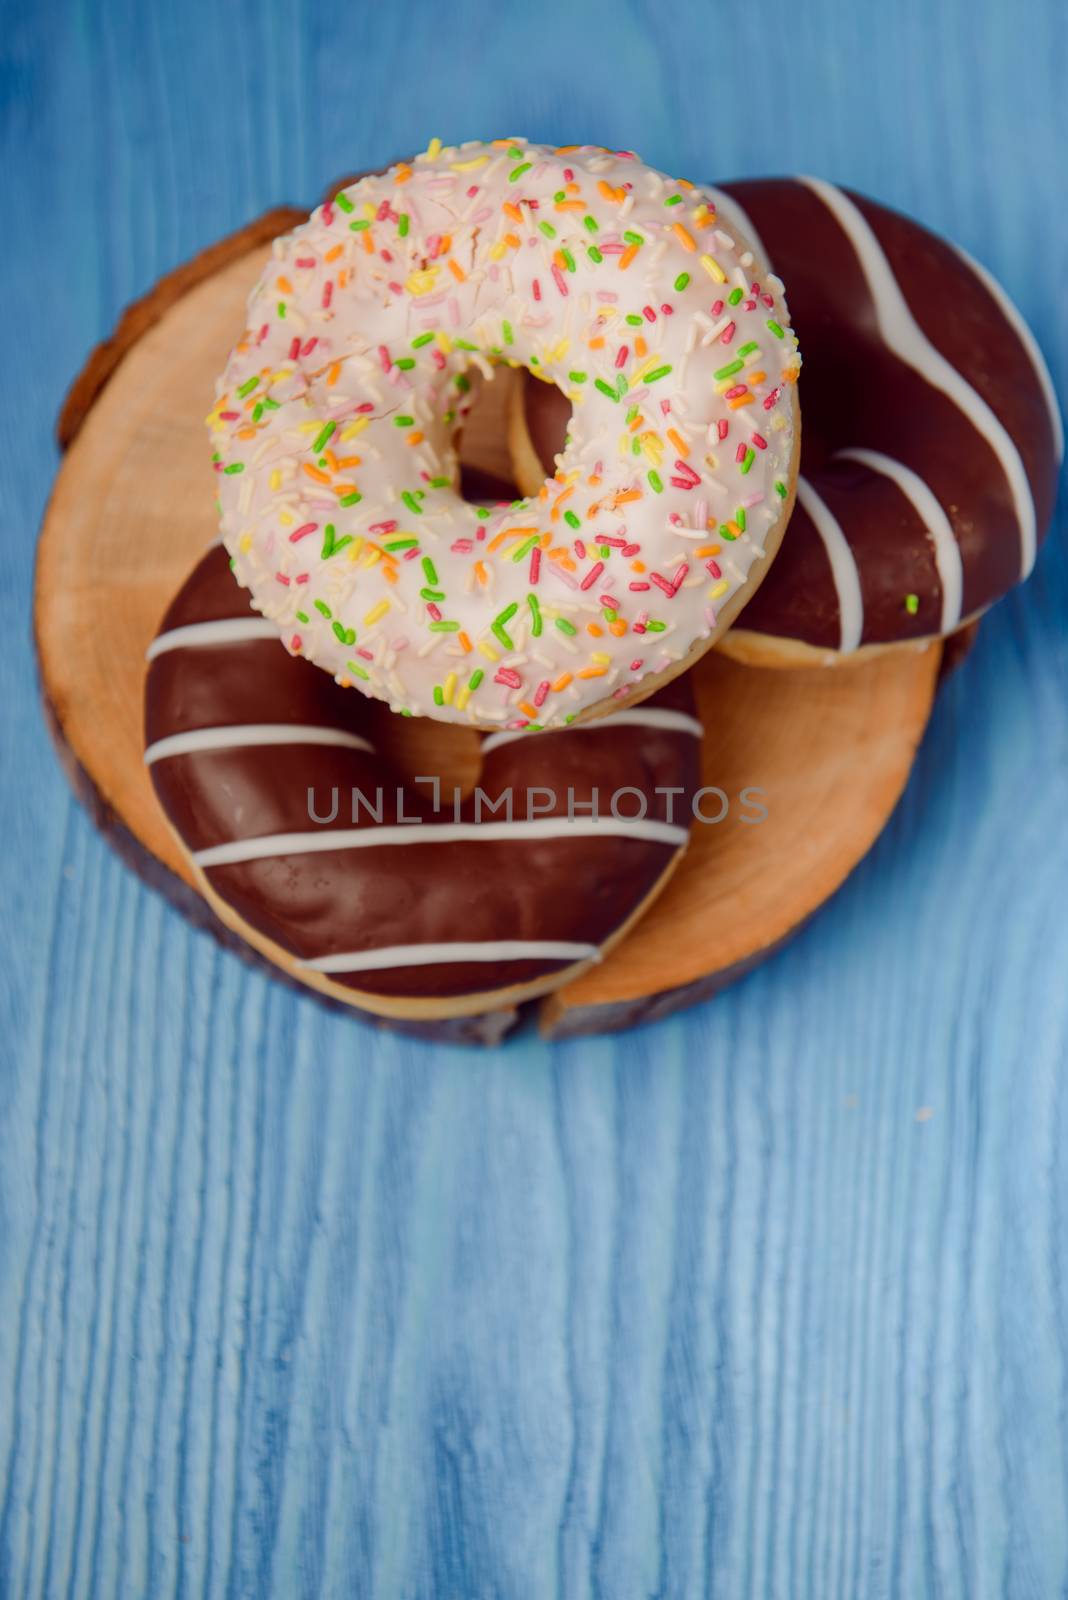 donuts lying on the table. blue background.